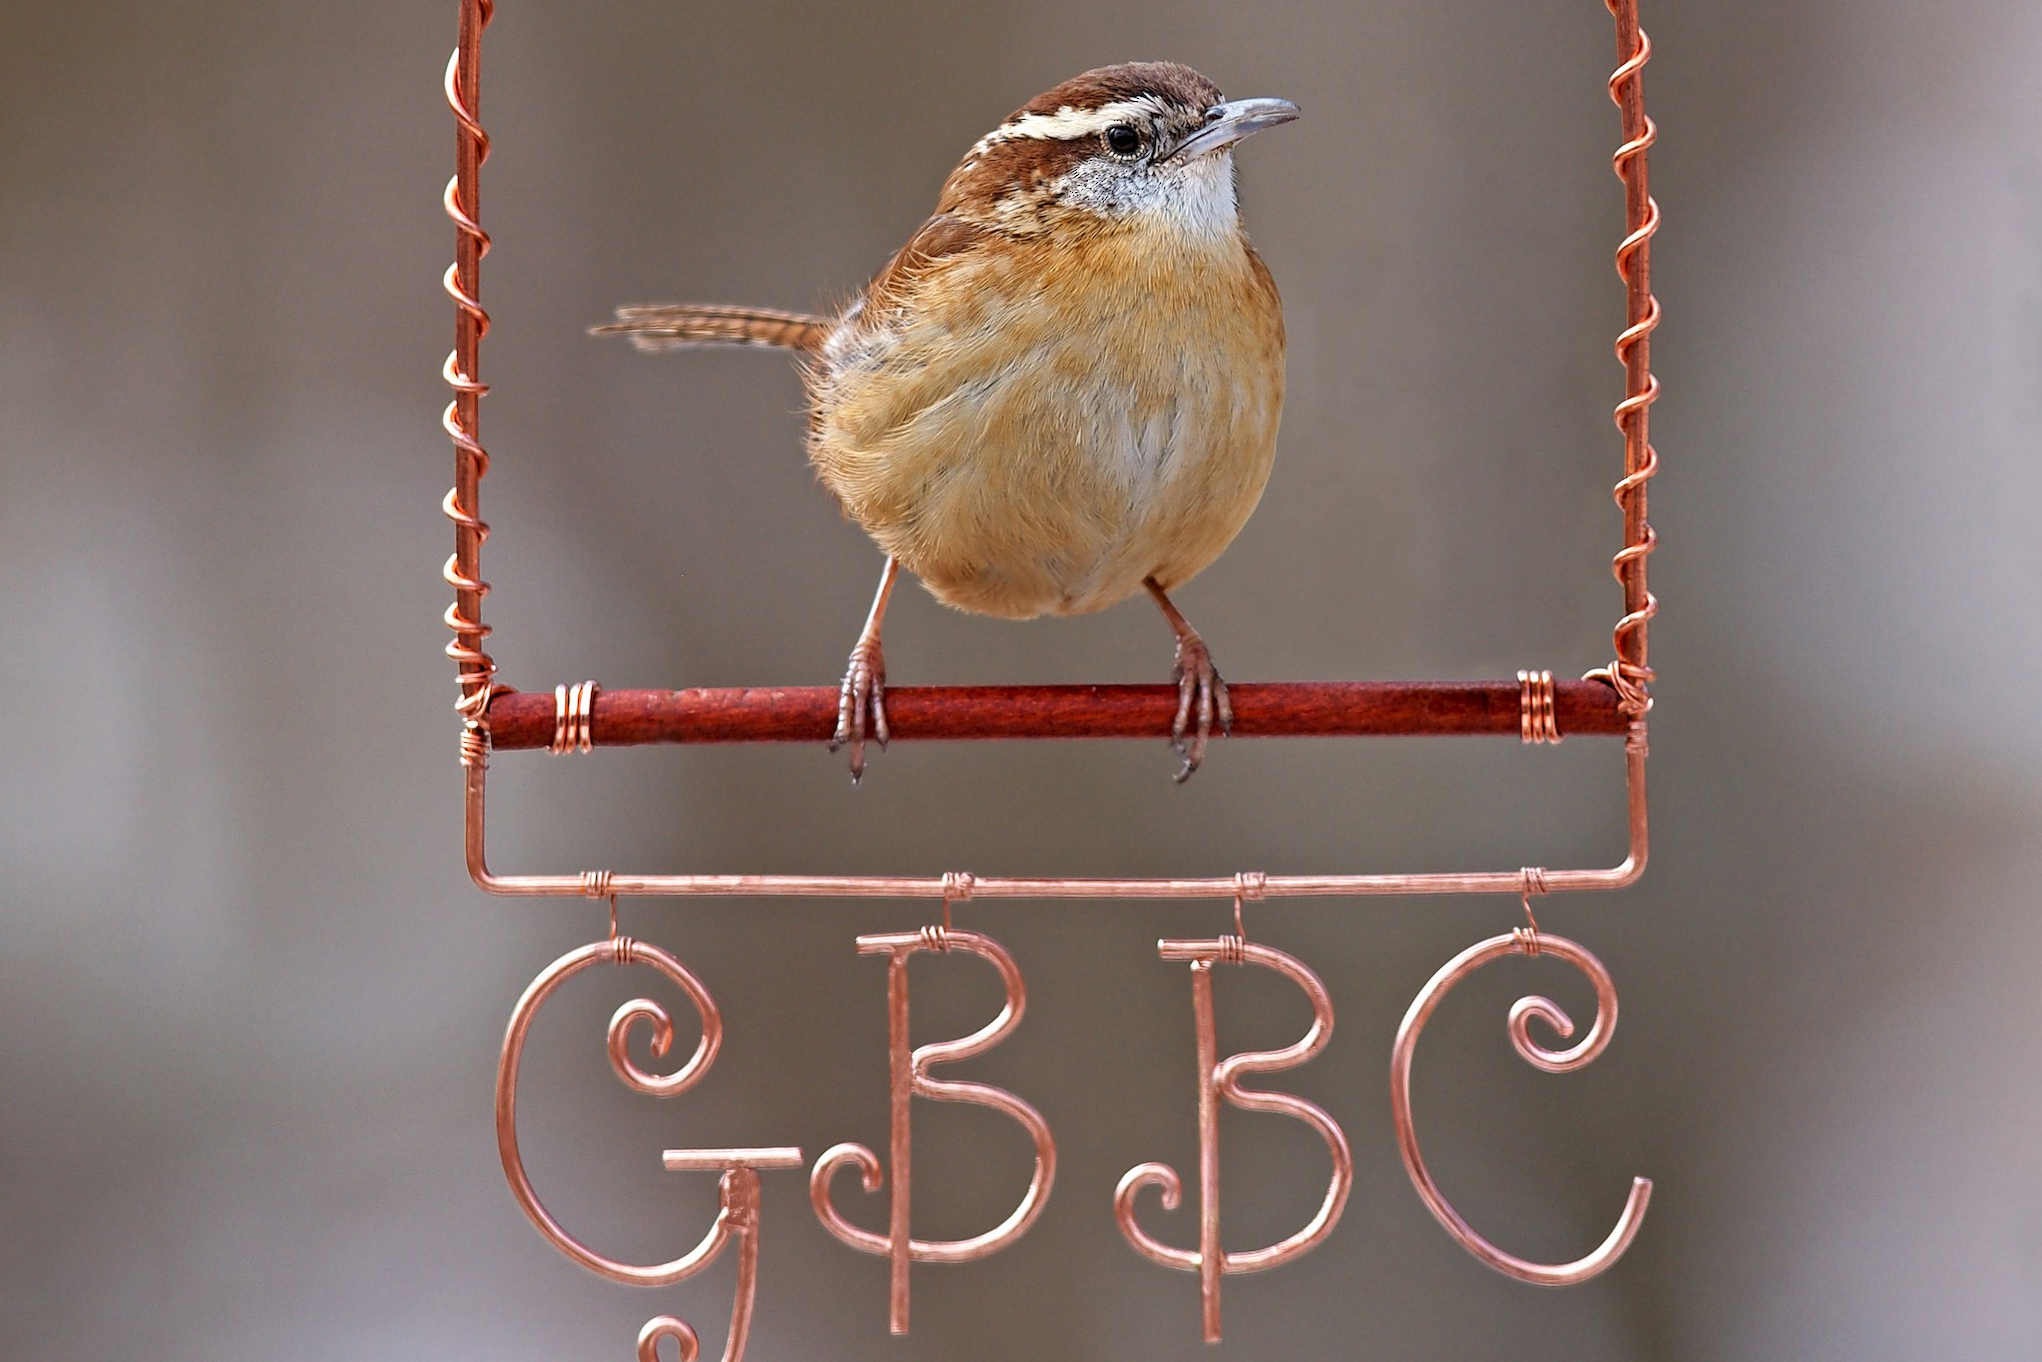 Carolina Wren perched on the letters GBBC